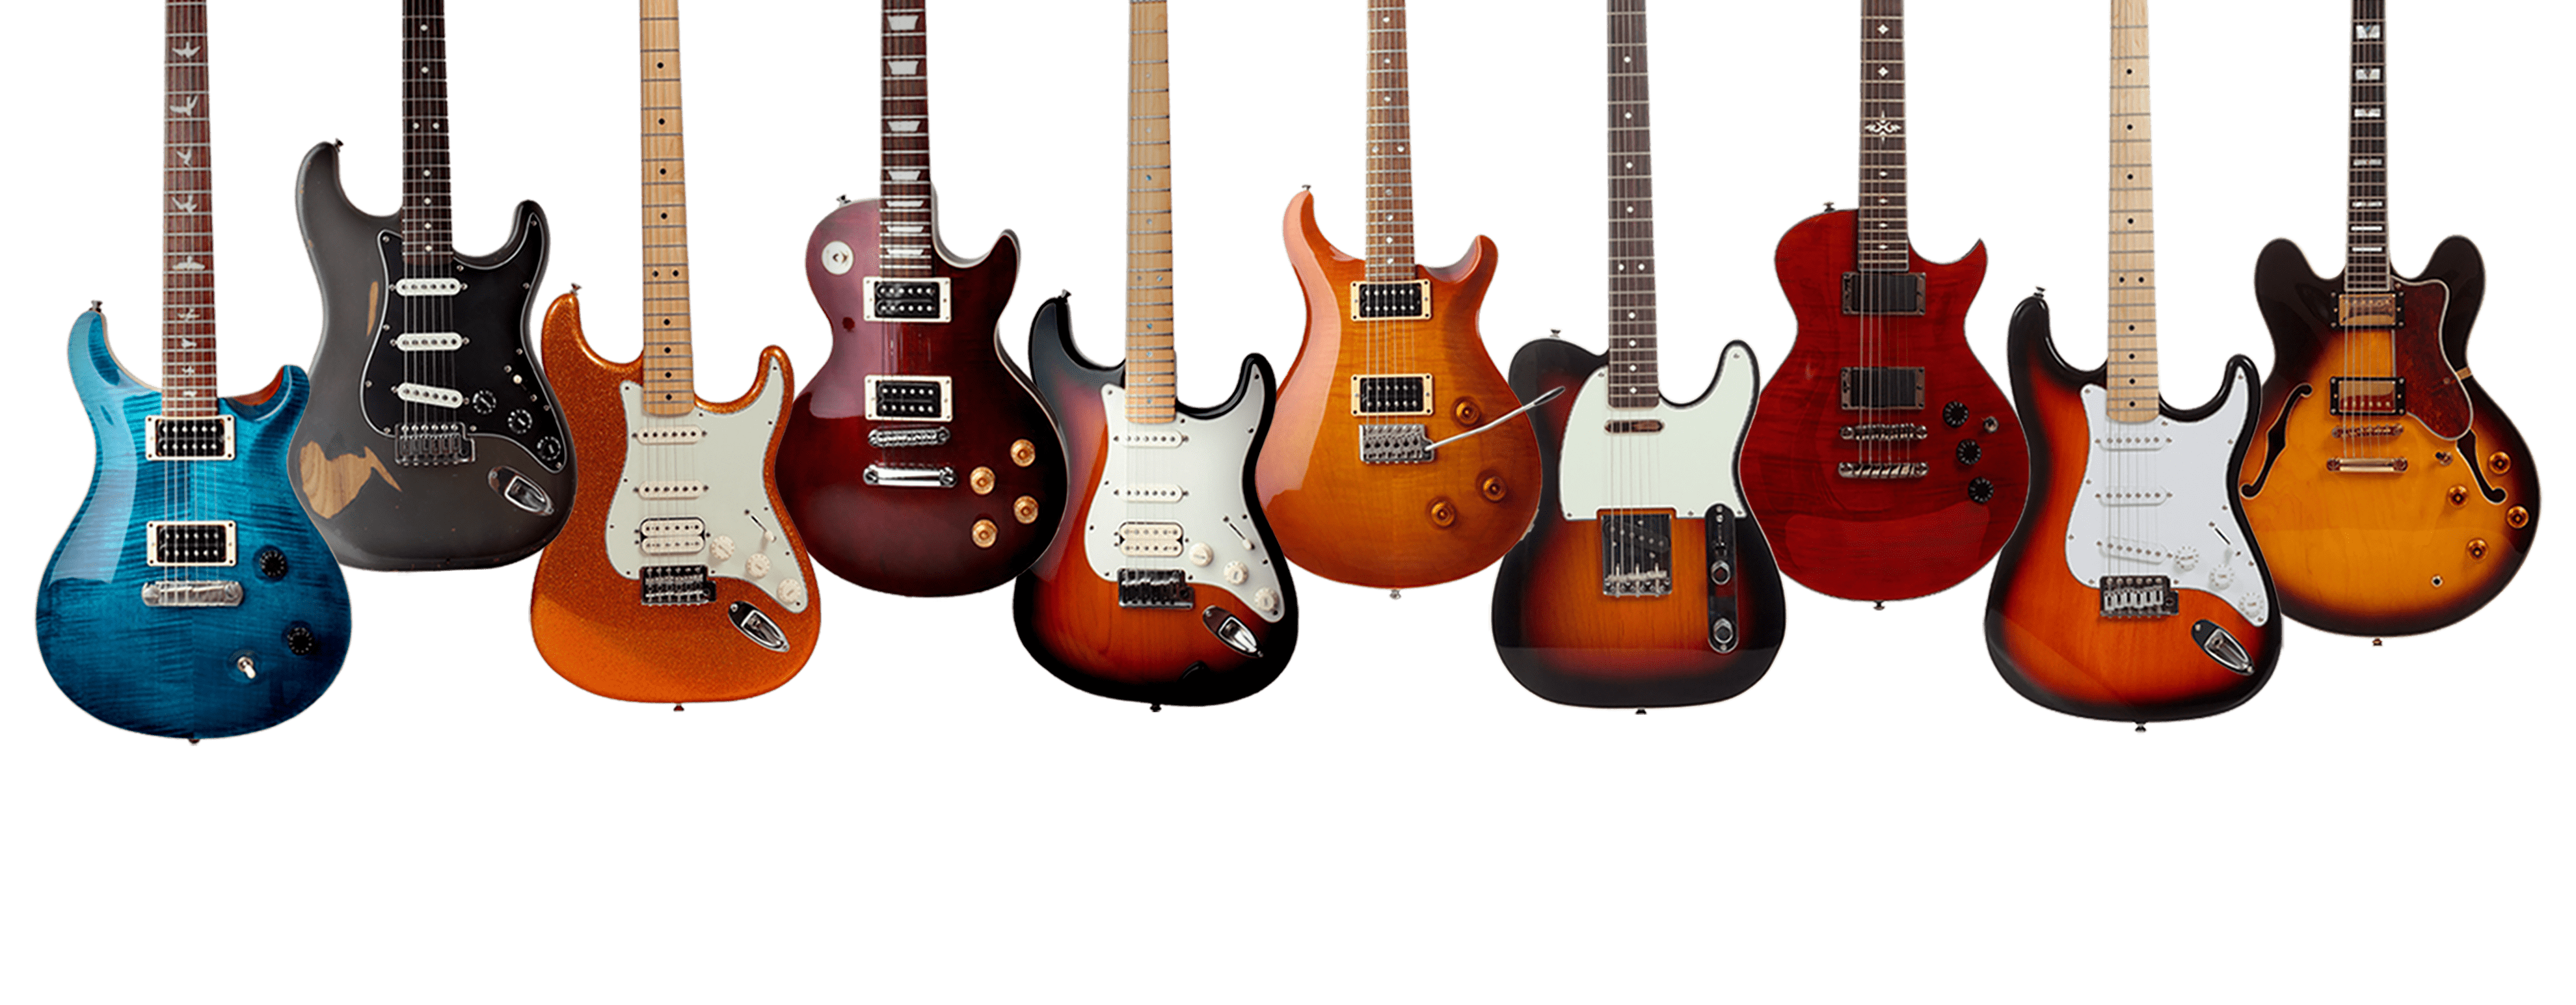 The Electric Guitar Collection エレクトリックギターコレクションBOX 